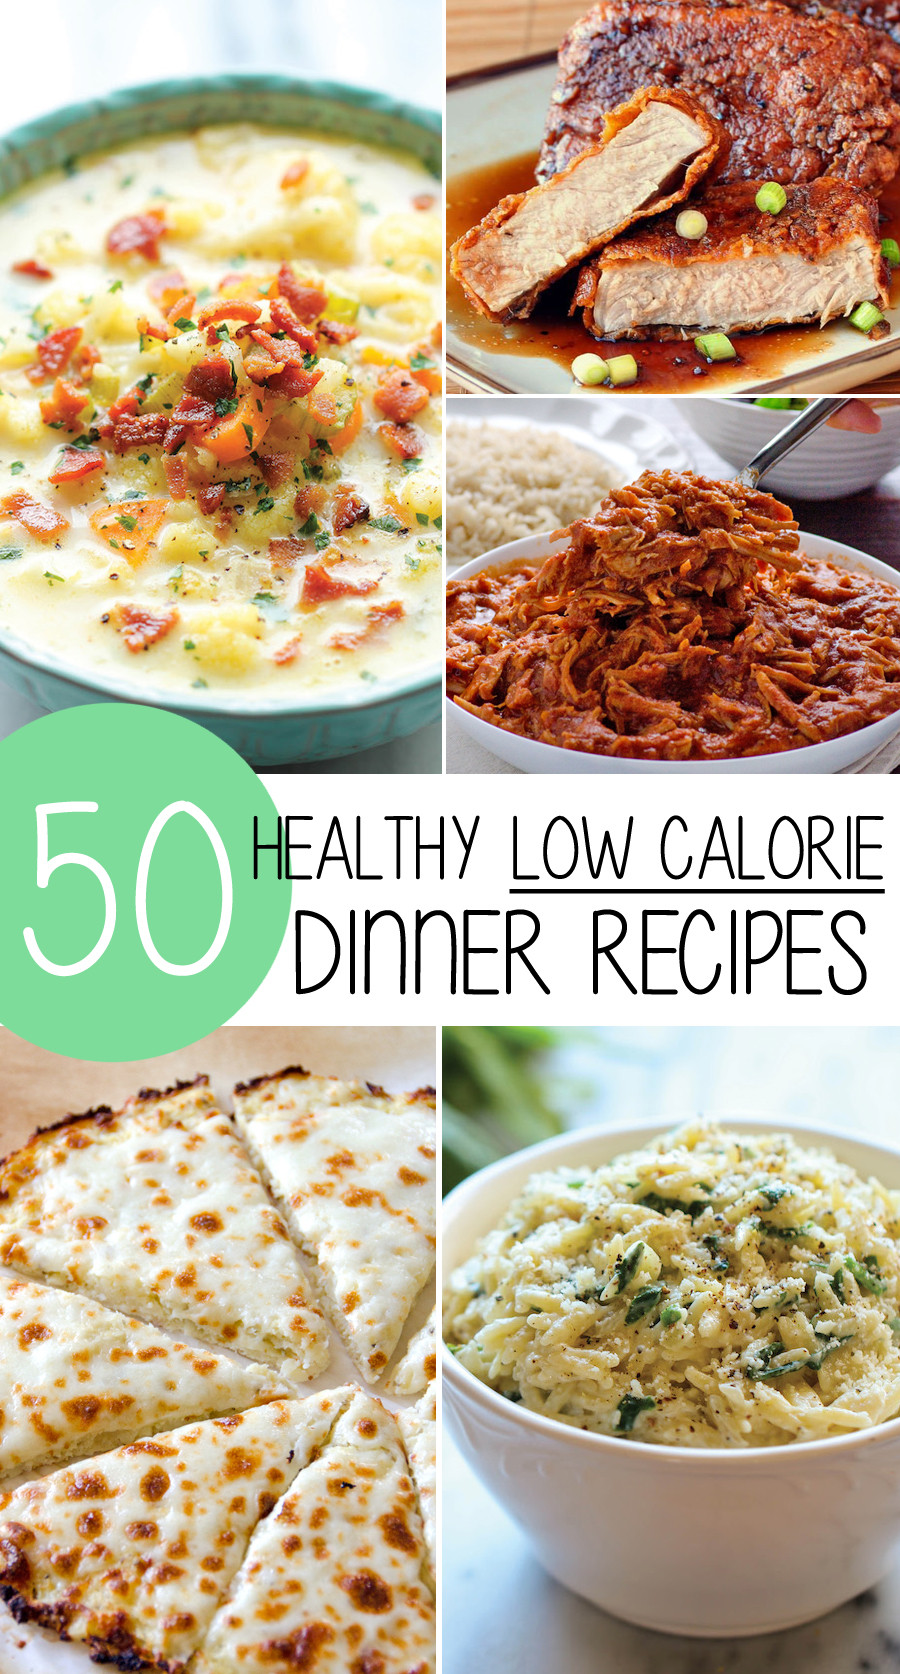 Low Calorie Lunch Recipes
 50 Healthy Low Calorie Weight Loss Dinner Recipes